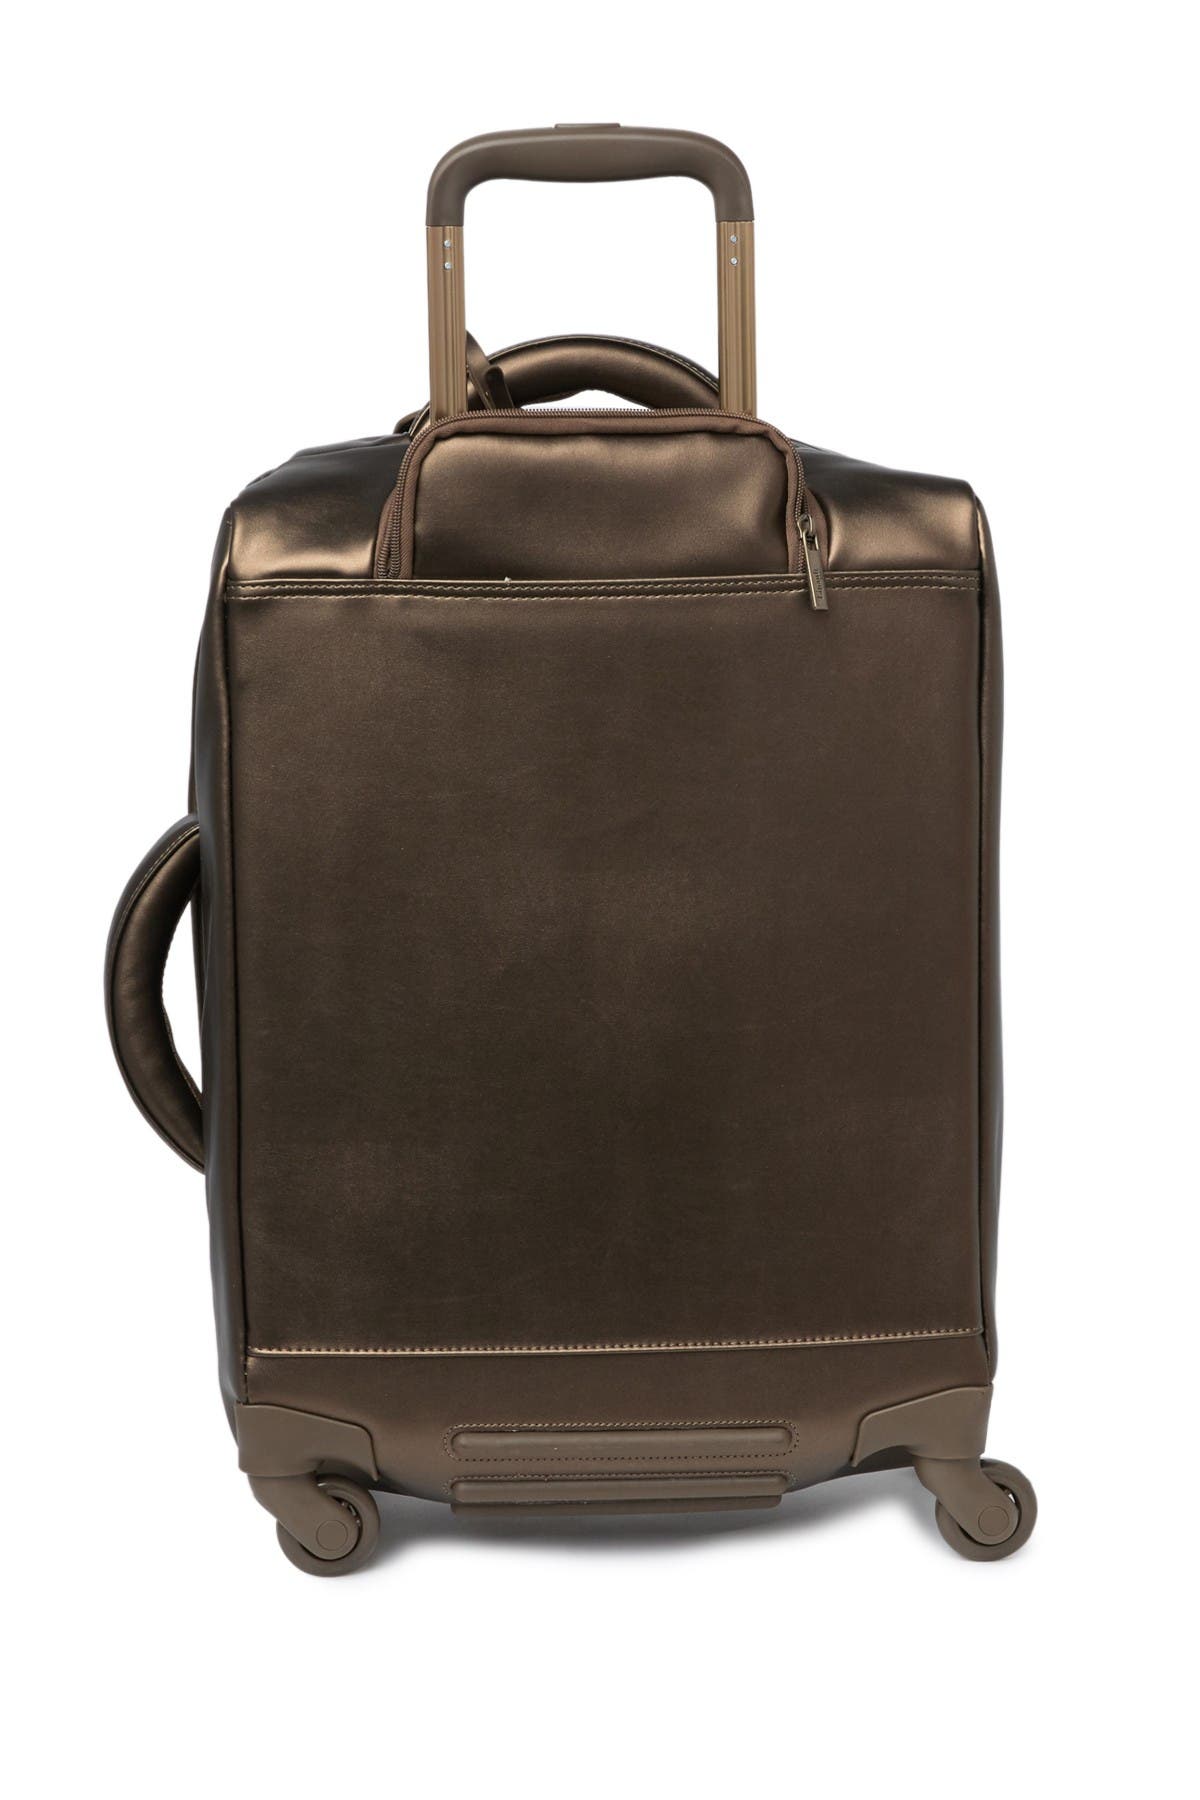 Lipault 55/20 Carry-on Spinner Luggage In Bronze